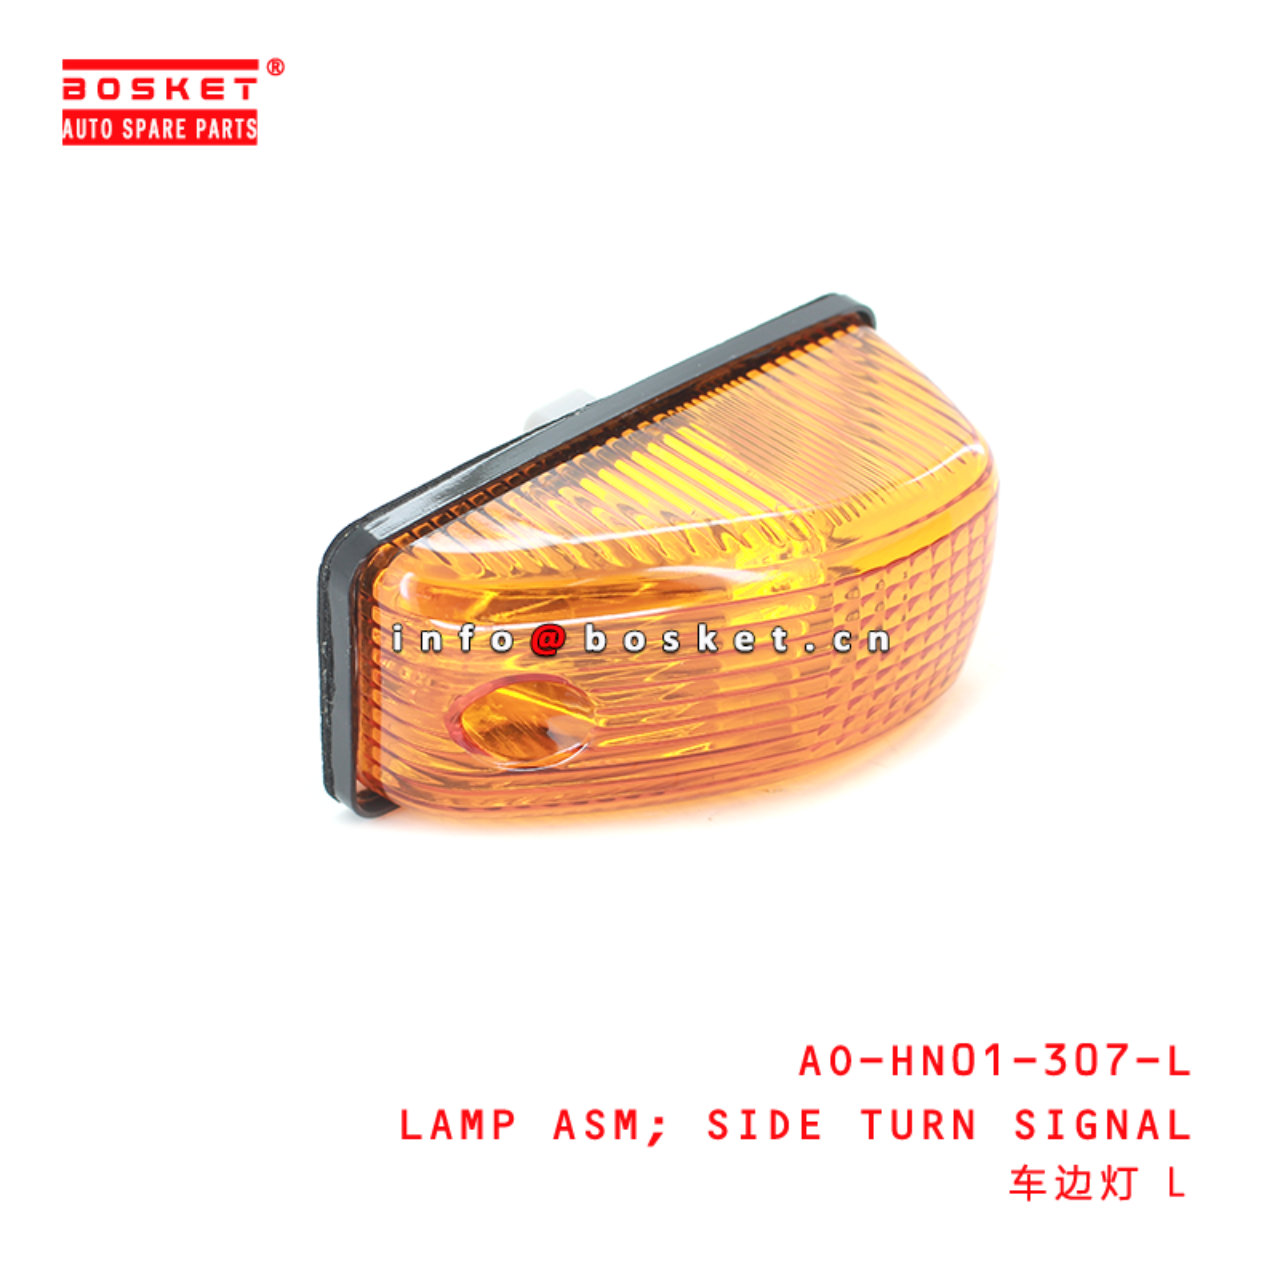 AO-HN01-307-L Side Turn Signal Lamp Assembly Suitable for ISUZU HINO300